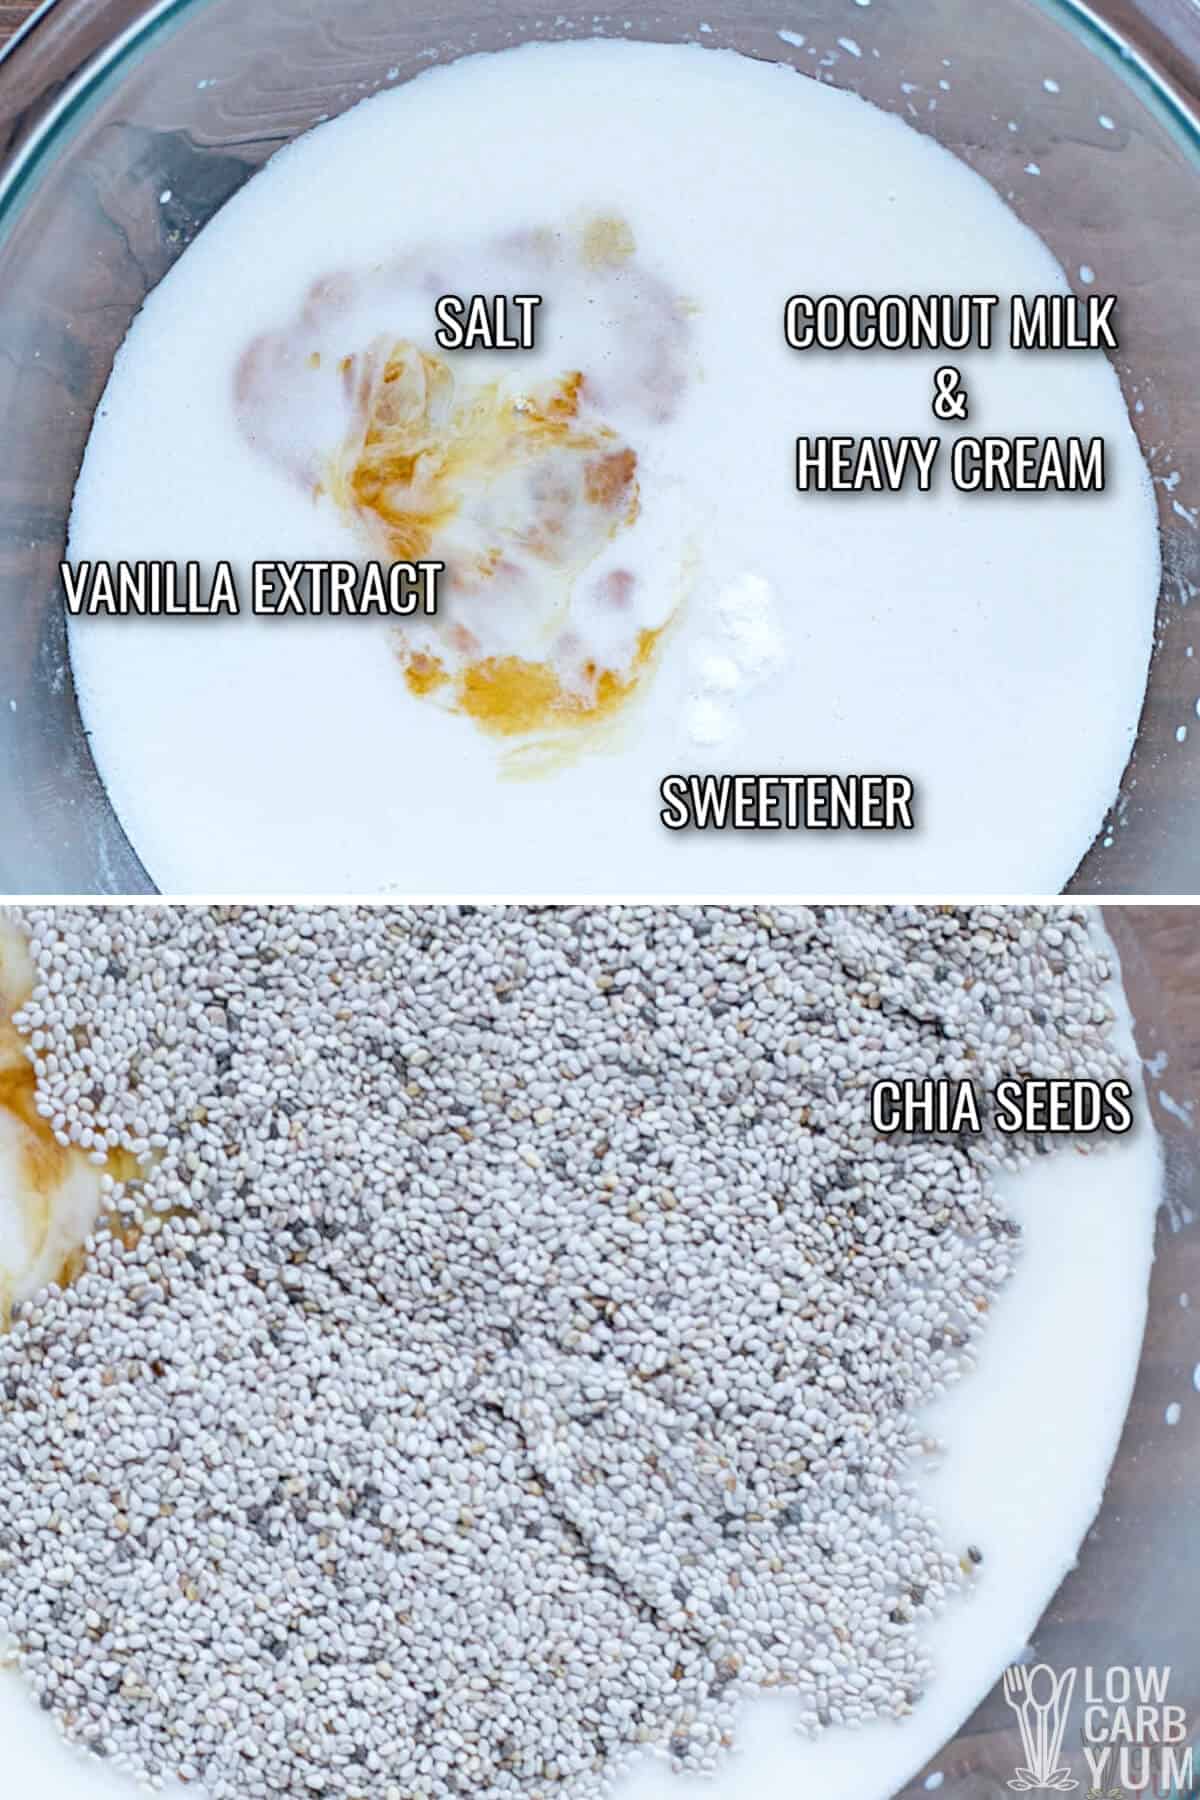 ingredients for chia pudding